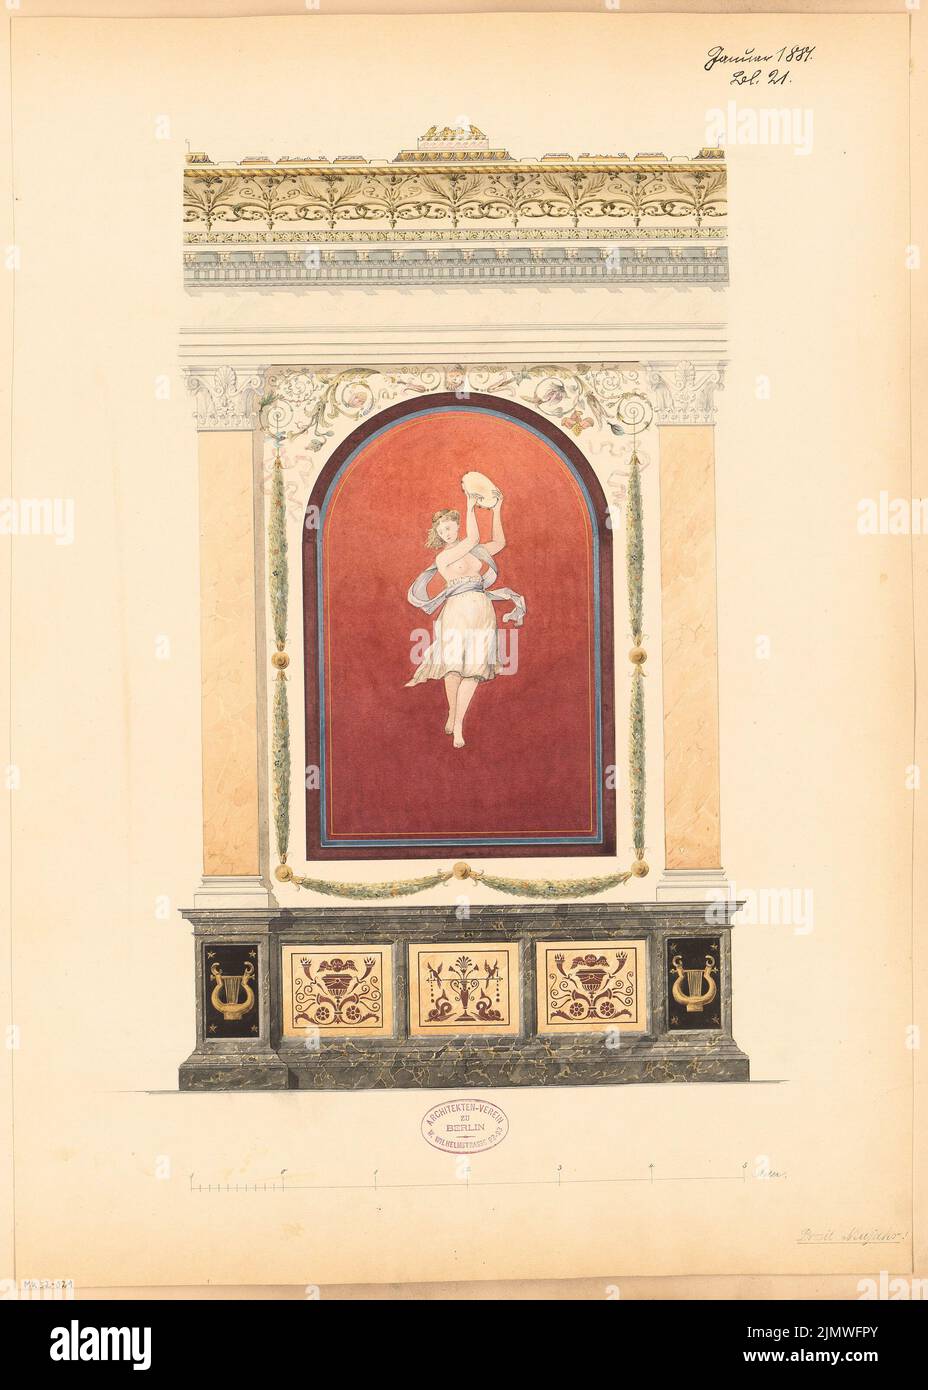 unknown architect, loggia. Monthly competition January 1881 (01.1881): Upper wall view (neckline); Scale bar. Tusche watercolor on the box, 56.1 x 40 cm (including scan edges) N.N. : Loggia. Monatskonkurrenz Januar 1881 Stock Photo